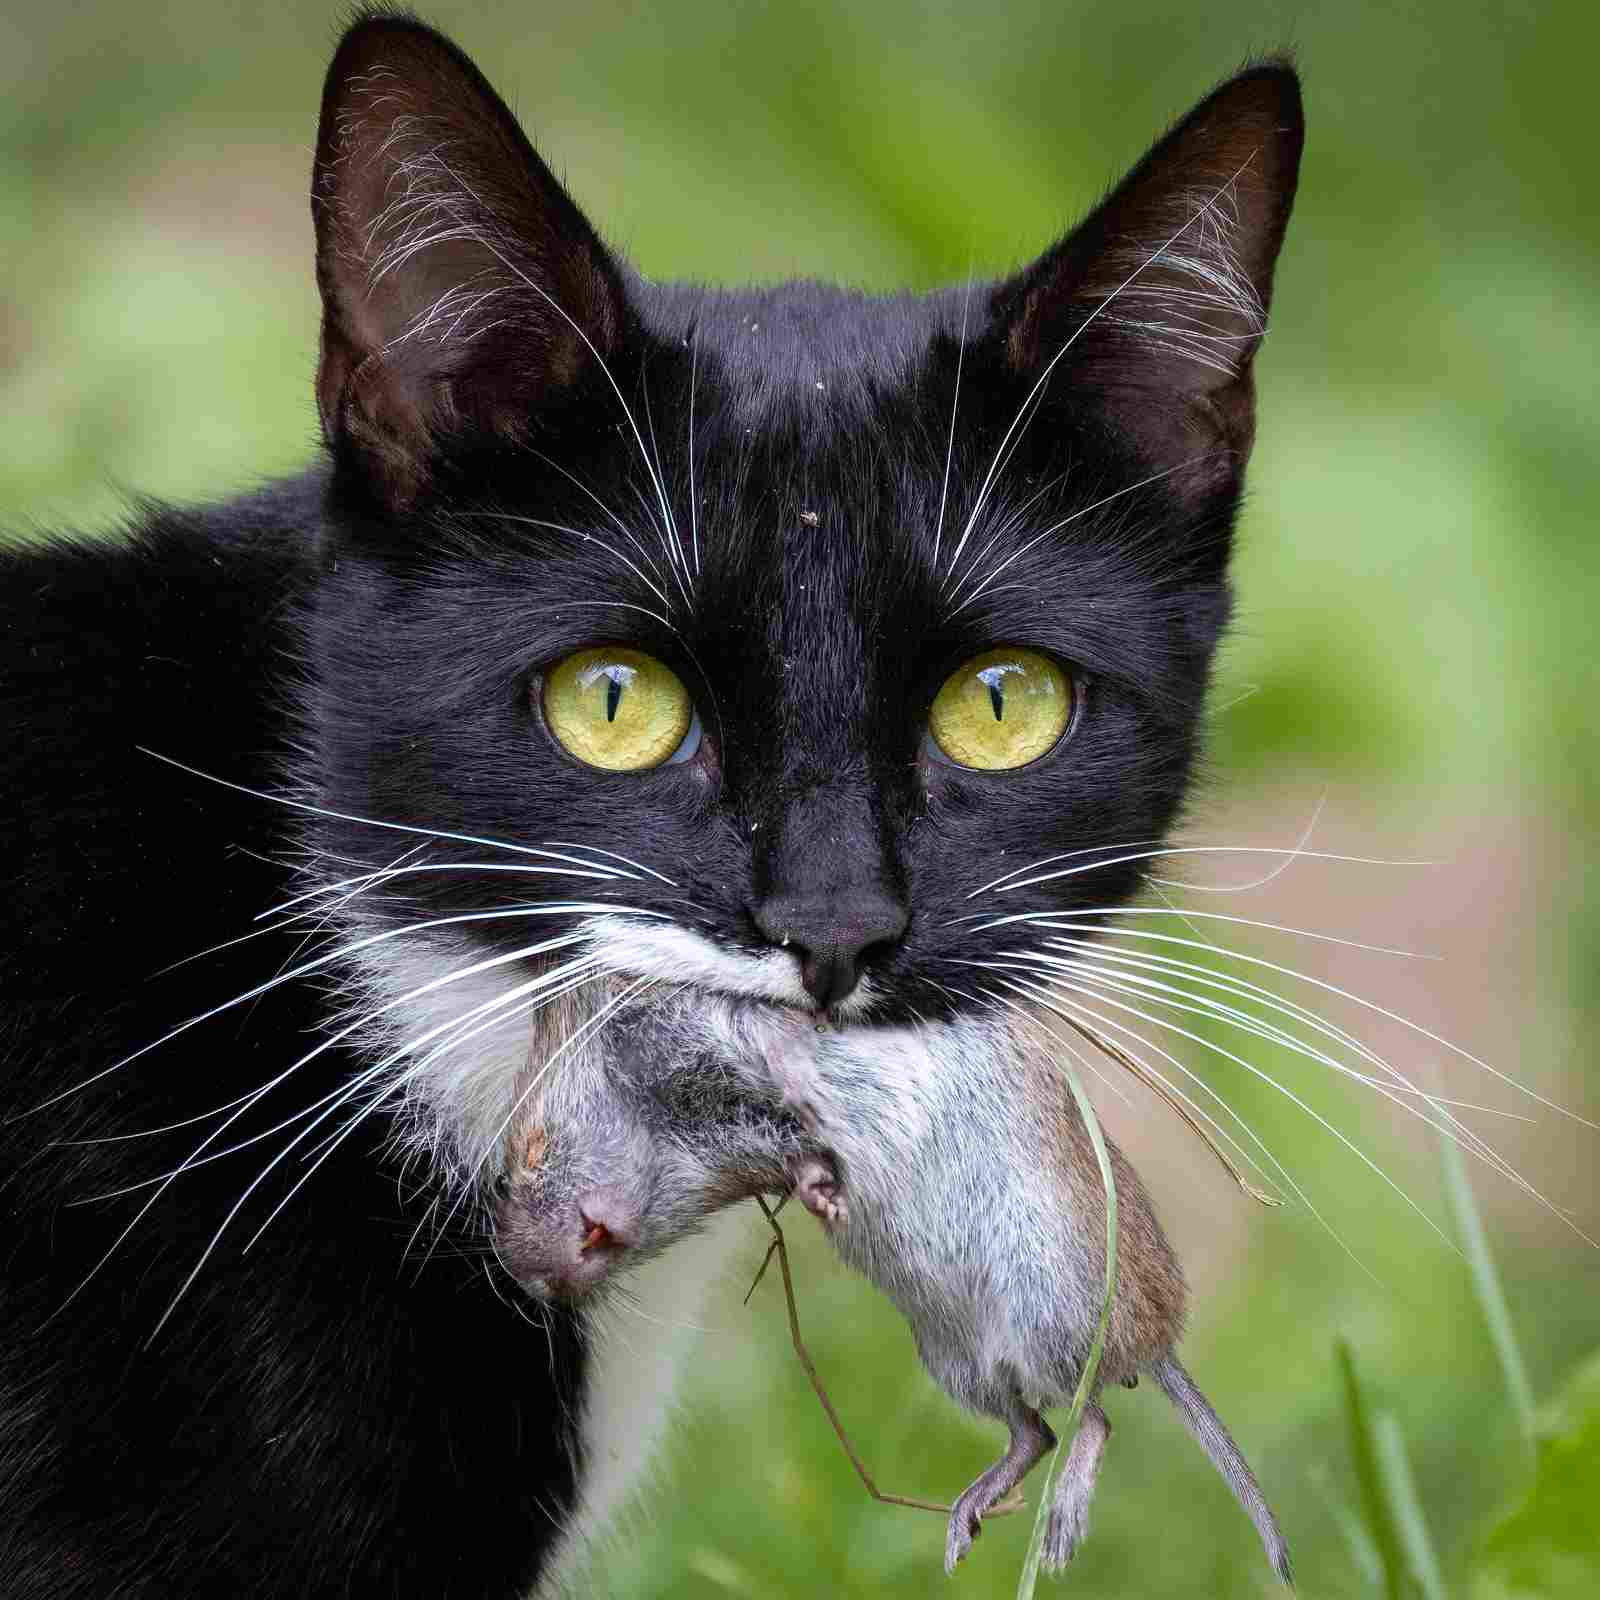 Is a Cat a Consumer: Due to Predatory and Carnivorous Habits, Cats are Classified as Secondary Consumers (Credit: Stig Nygaard 2021 .CC BY 2.0.)